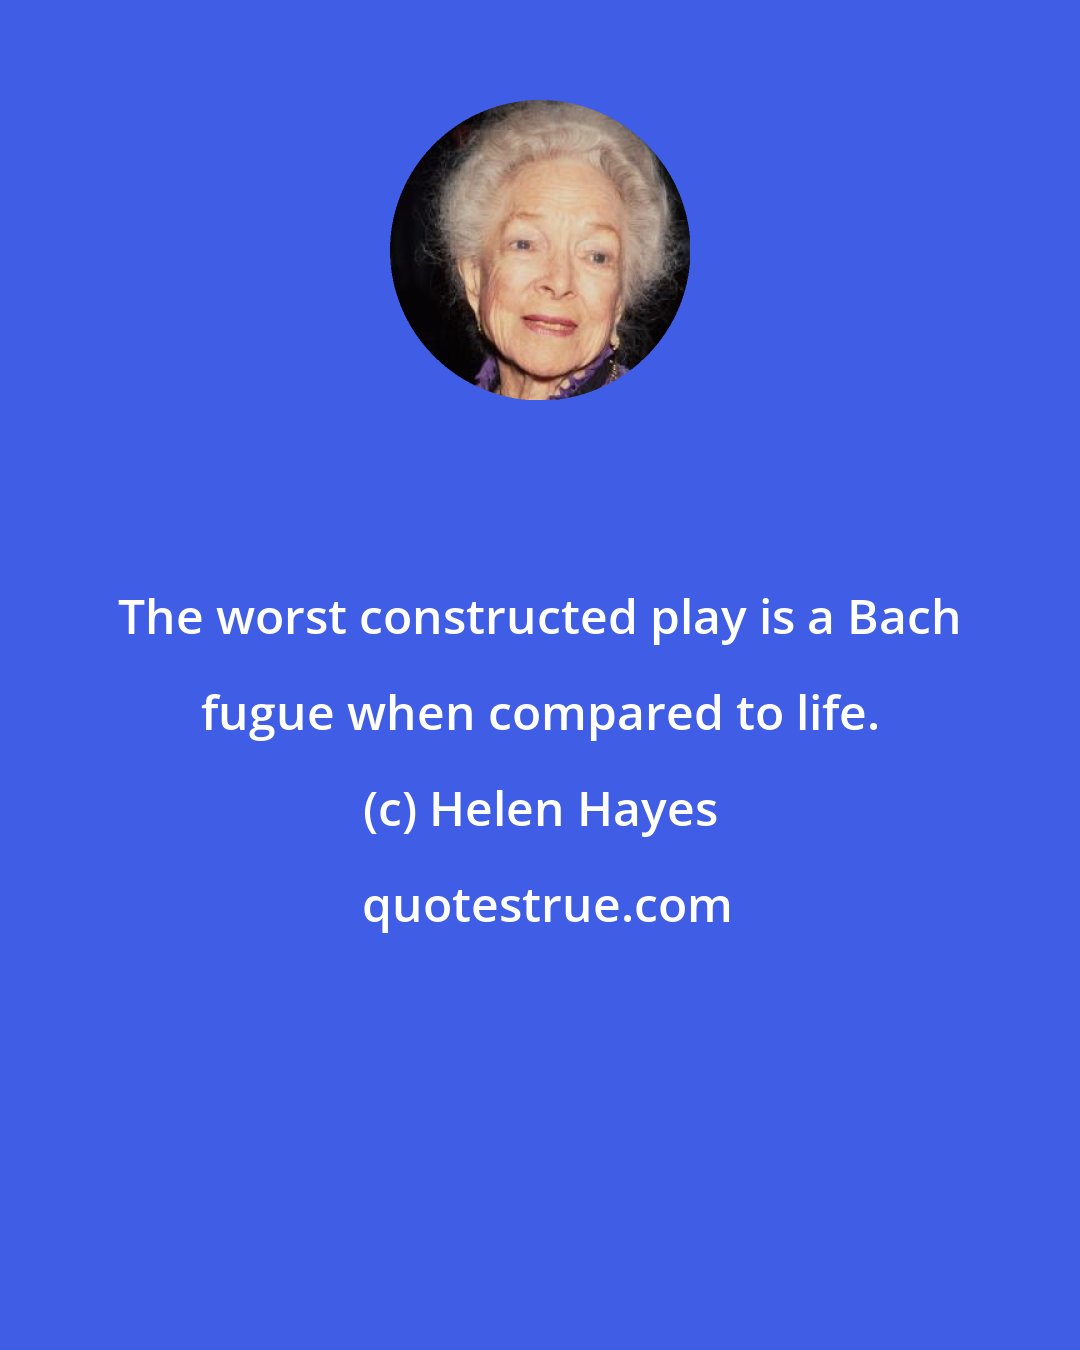 Helen Hayes: The worst constructed play is a Bach fugue when compared to life.